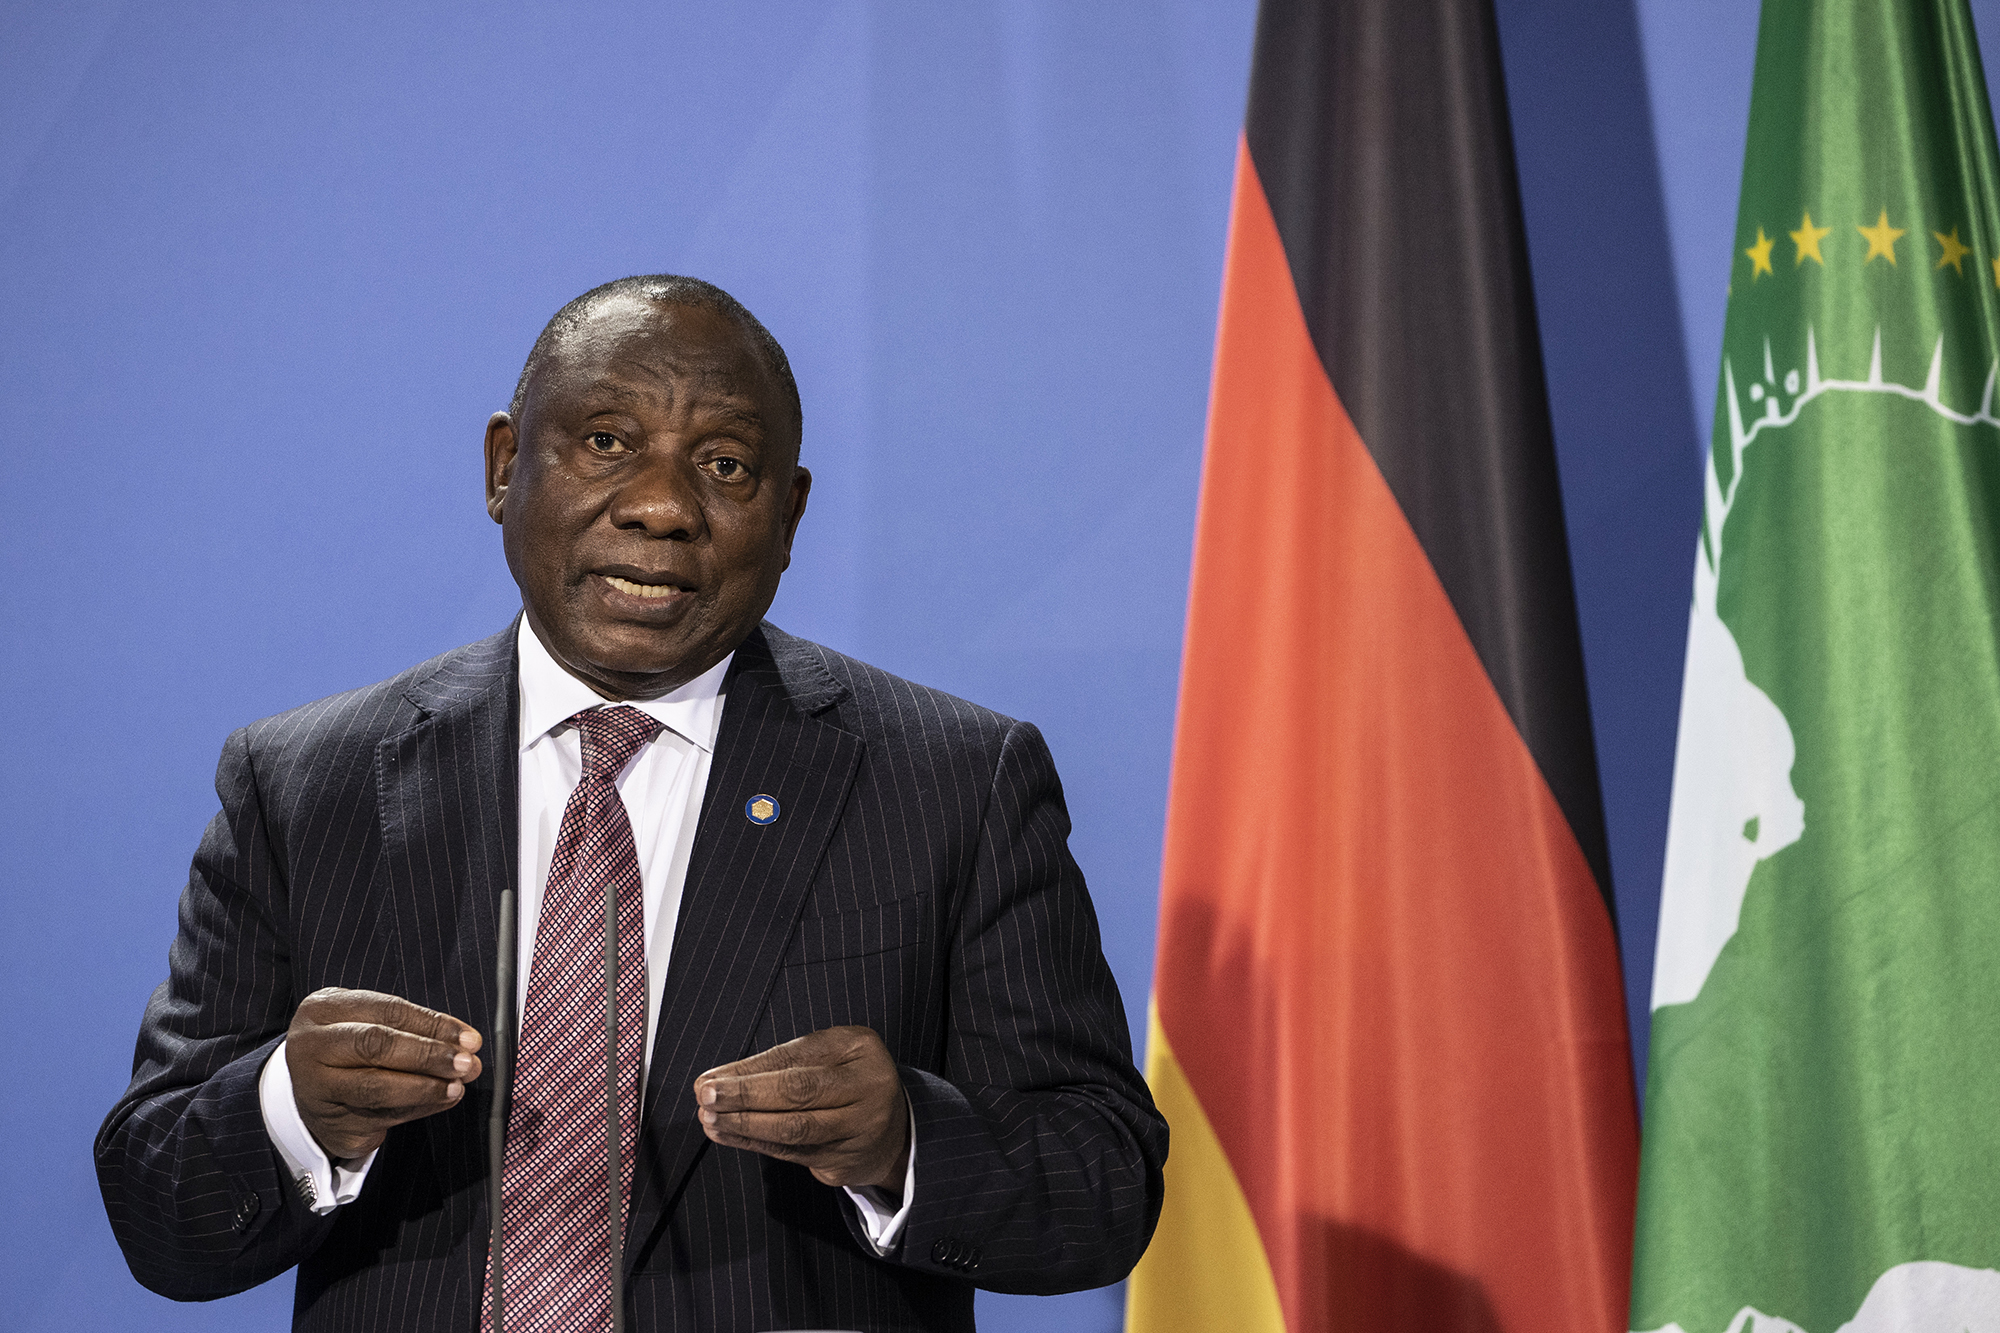 Cyril Ramaphosa, President of the South African Republic spreaks at a press conference after the G20 Compact with Africa conference at the Chancellery in Berlin on August 27, 2021 in Berlin, Germany.